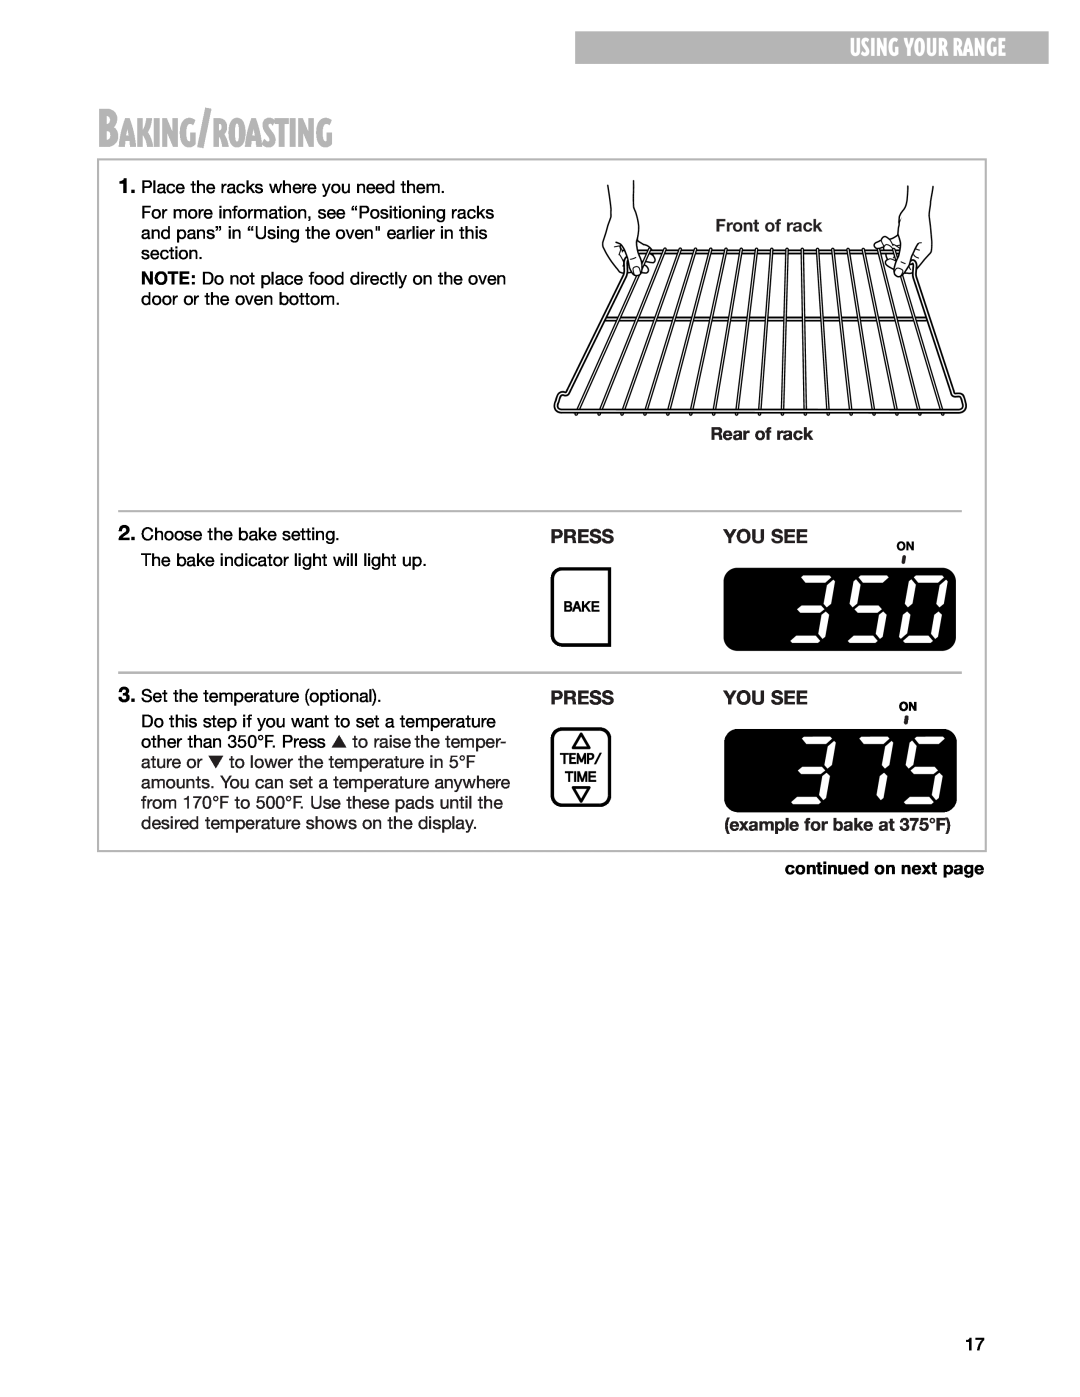 Whirlpool RF314PXG Baking/Roasting, Using Your Range, Press, You See, Front of rack, Rear of rack, continued on next page 